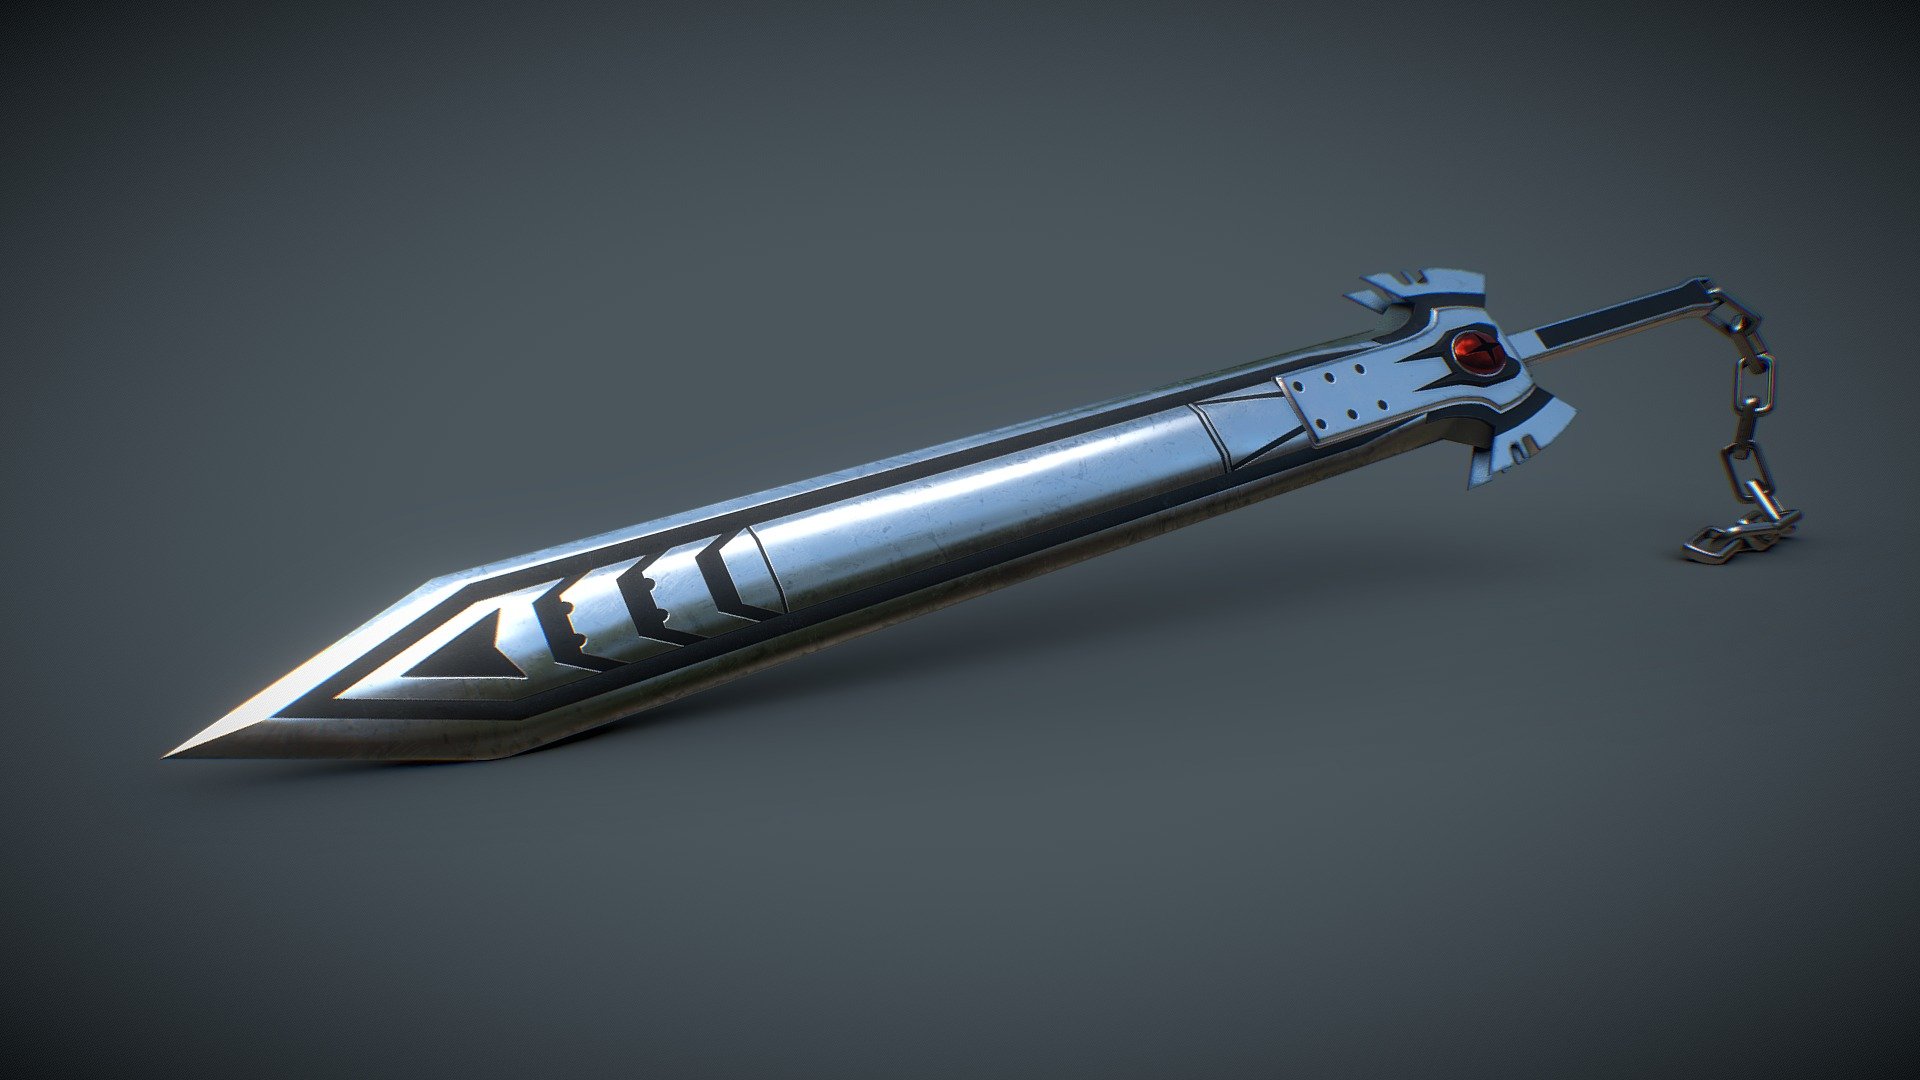 Incursio Sword from Anime Series Akame Ga Kill

Modeled in Cinema4D

Texured in Substance Painter and Photoshop

See also Recent Weapons Collection Uploads :
https://sketchfab.com/mohjeha_/collections/weapons - Incursio Sword ( Akame Ga Kill ) - 3D model by MohJeha (@mohjeha_) 3d model